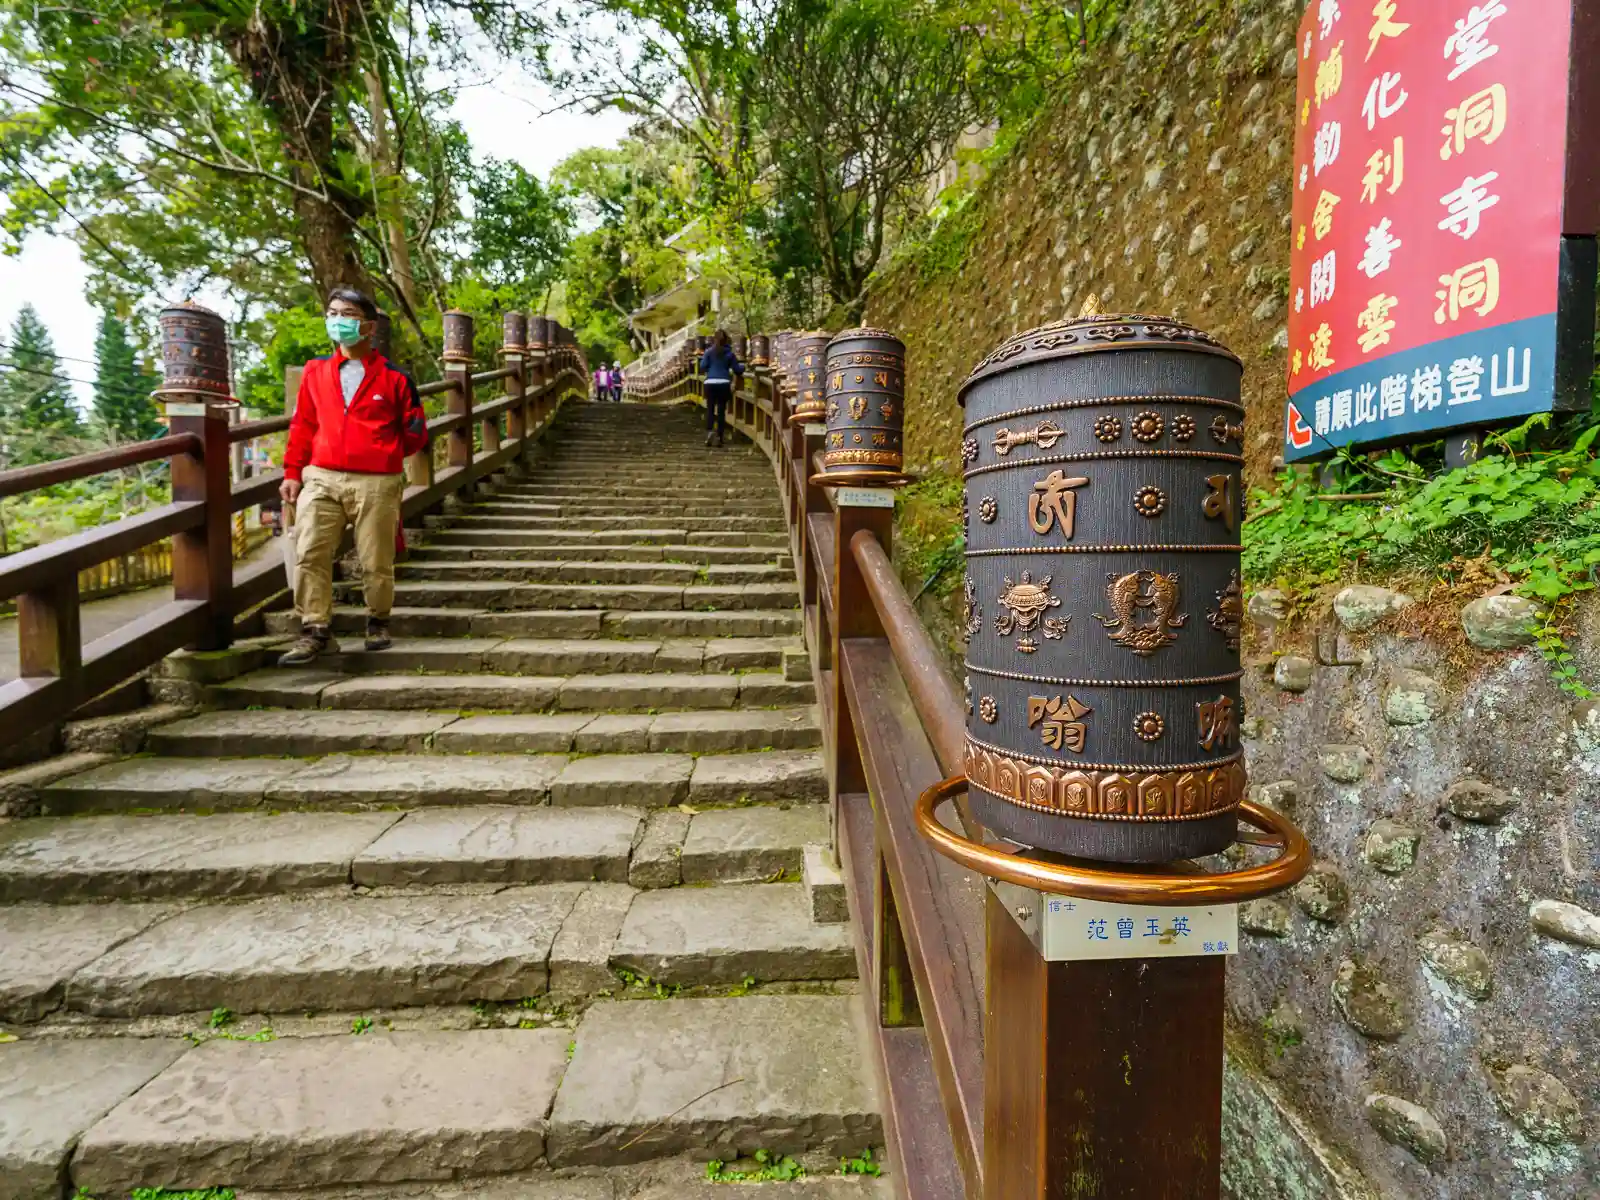 Large rotating scripture wheels adorn the railings on a wide set of stone stairs leading up the mountain.